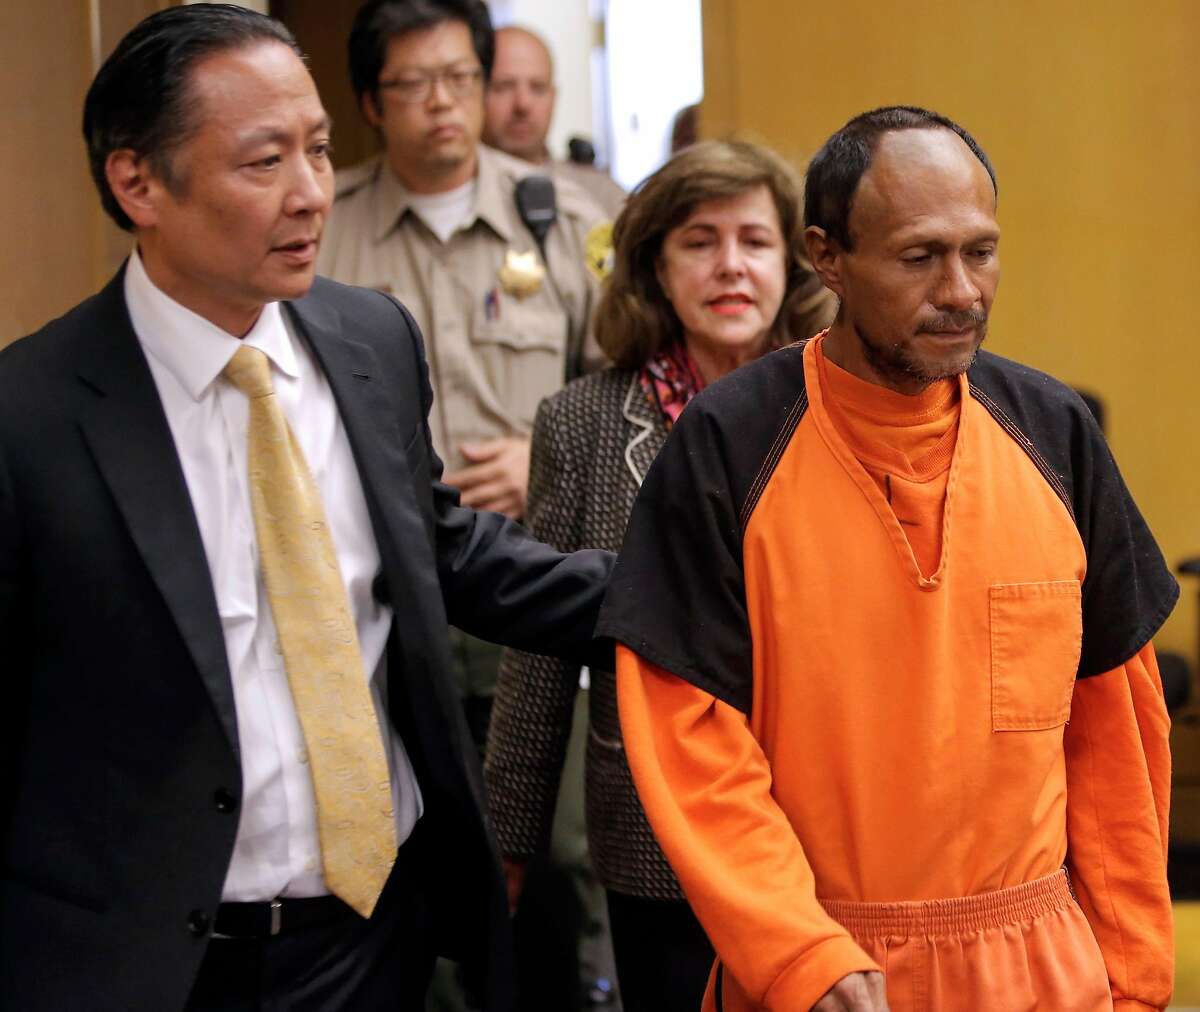 San Francisco Public Defender Jeff Adachi, (left) leads Juan Francisco Lopez-Sanchez, into the Hall of Justice in San Francisco, Calif. on Tues. July 7, 2015, for his arraignment on suspicion of murder in the shooting death of Kate Steinle on San Francisco‚��s Pier 14 last Wednesday.